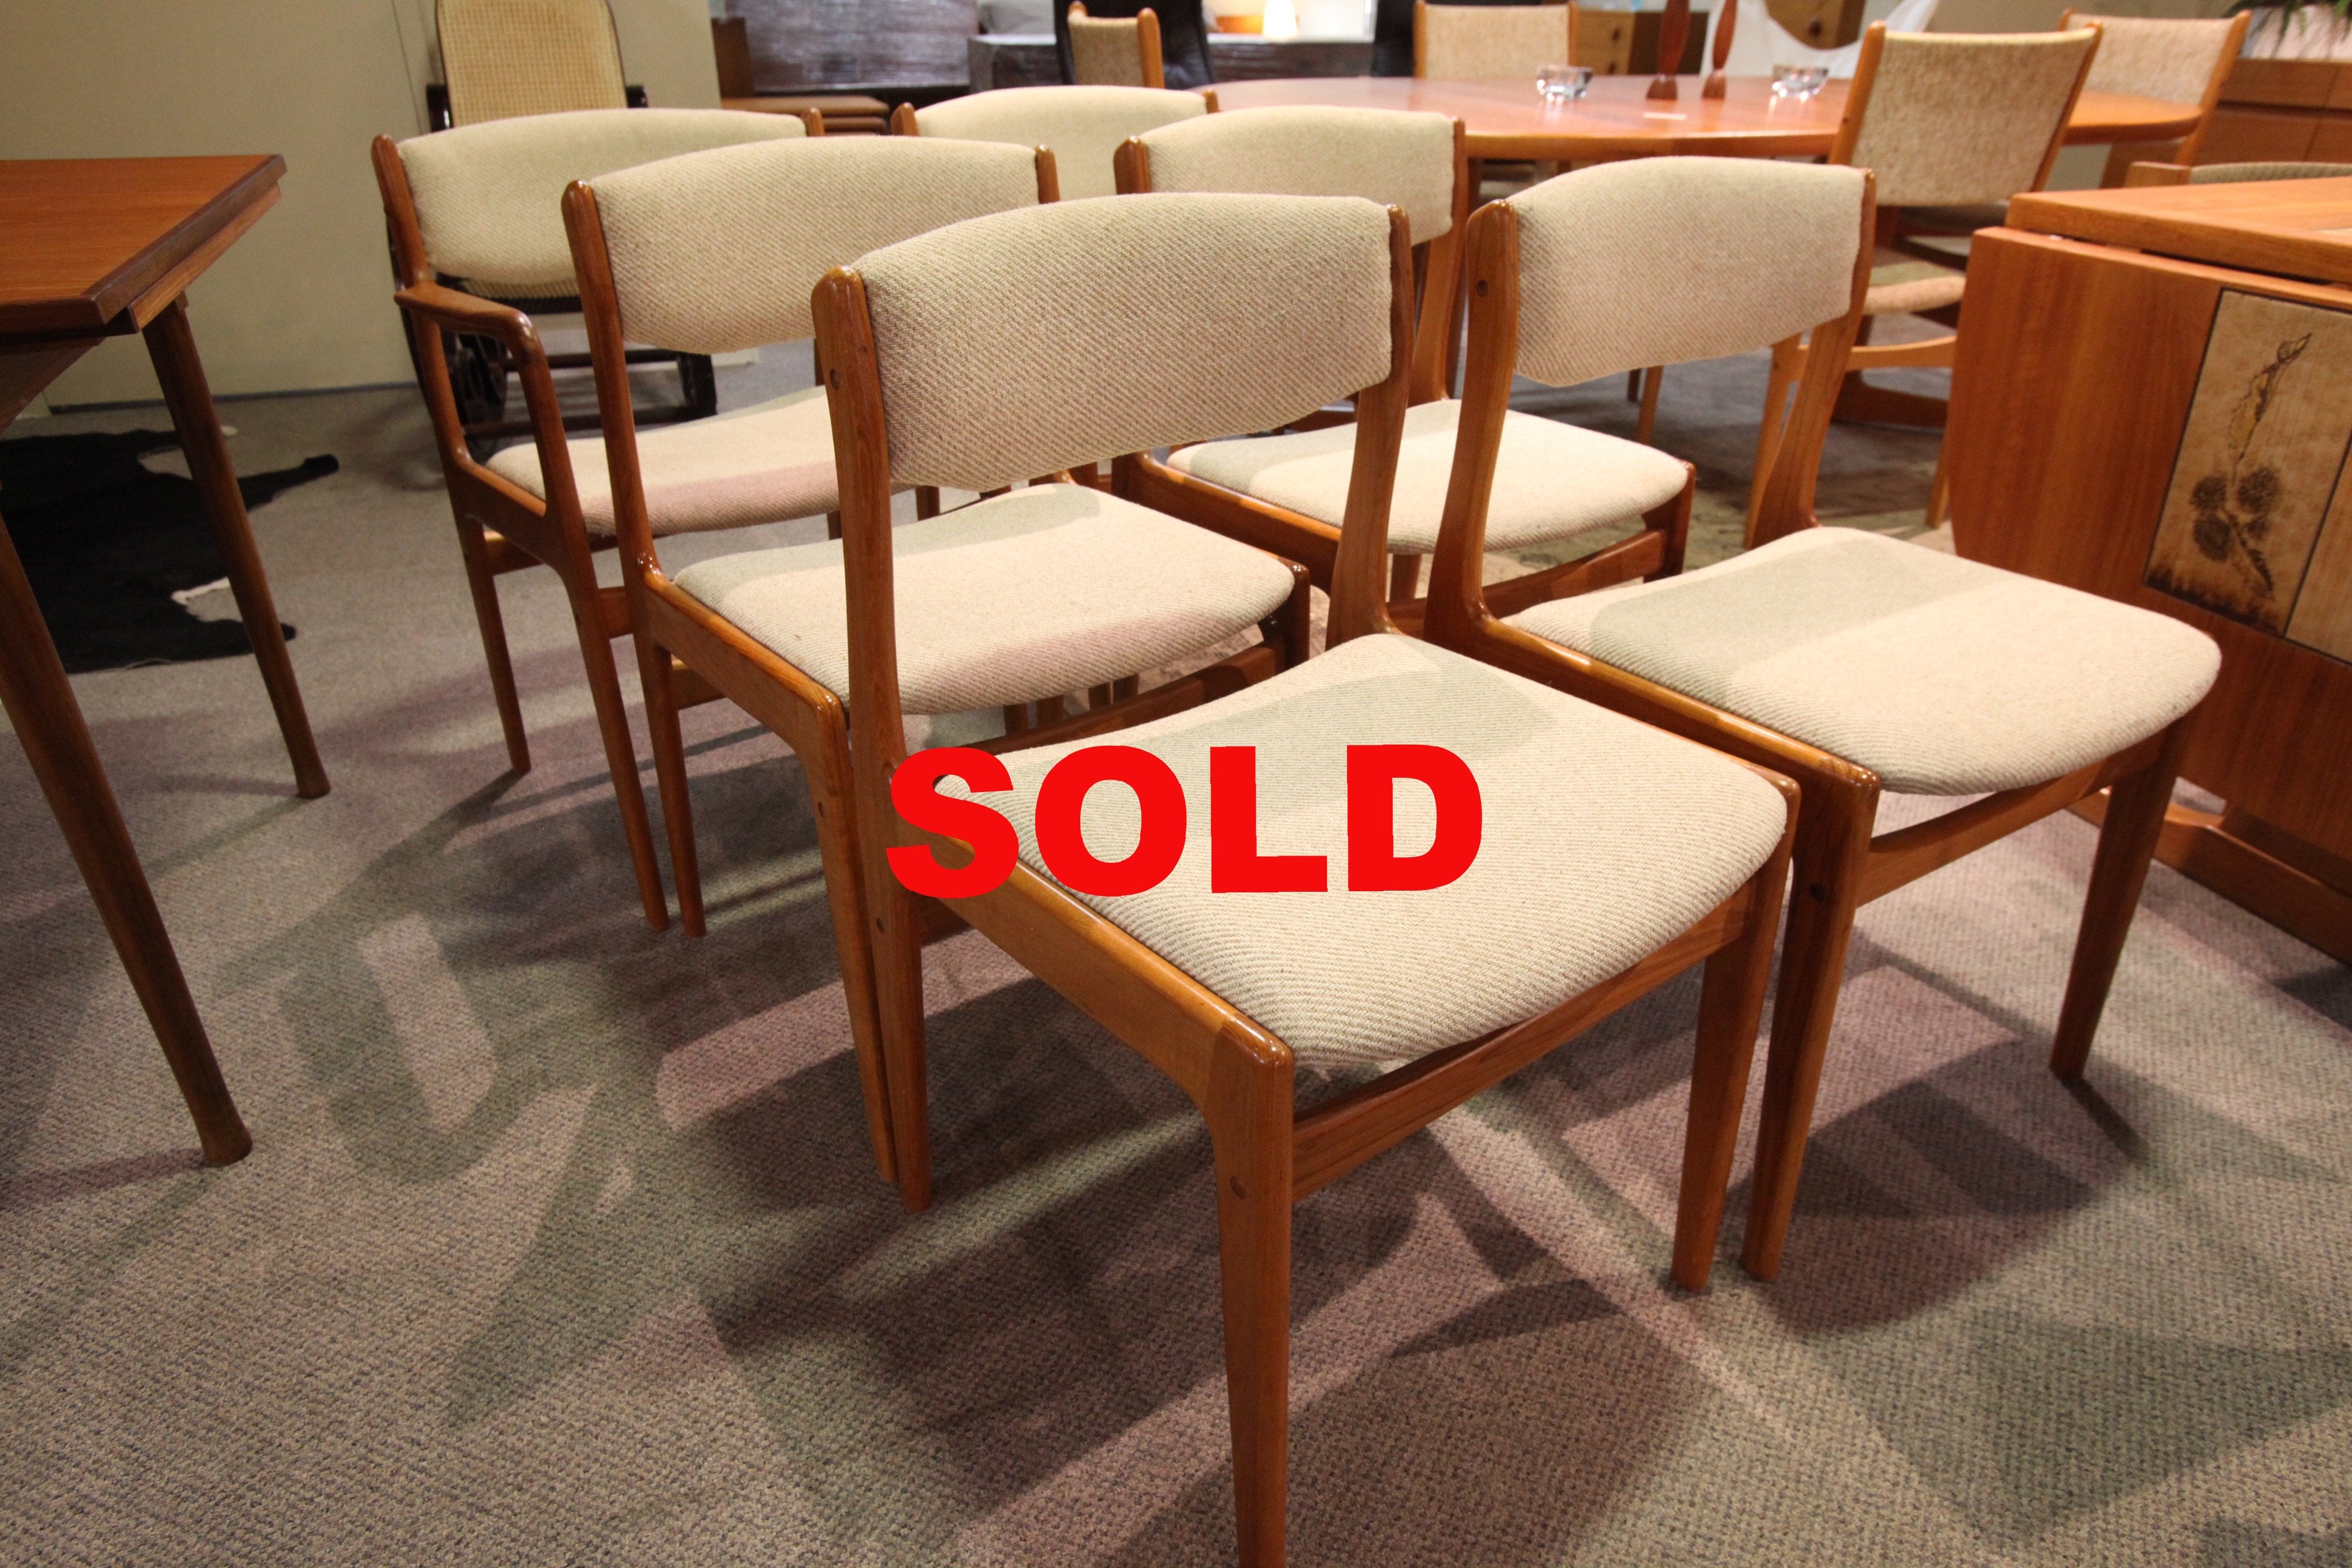 Set of 6 Teak Chairs (4 chairs, 2 arm chairs)